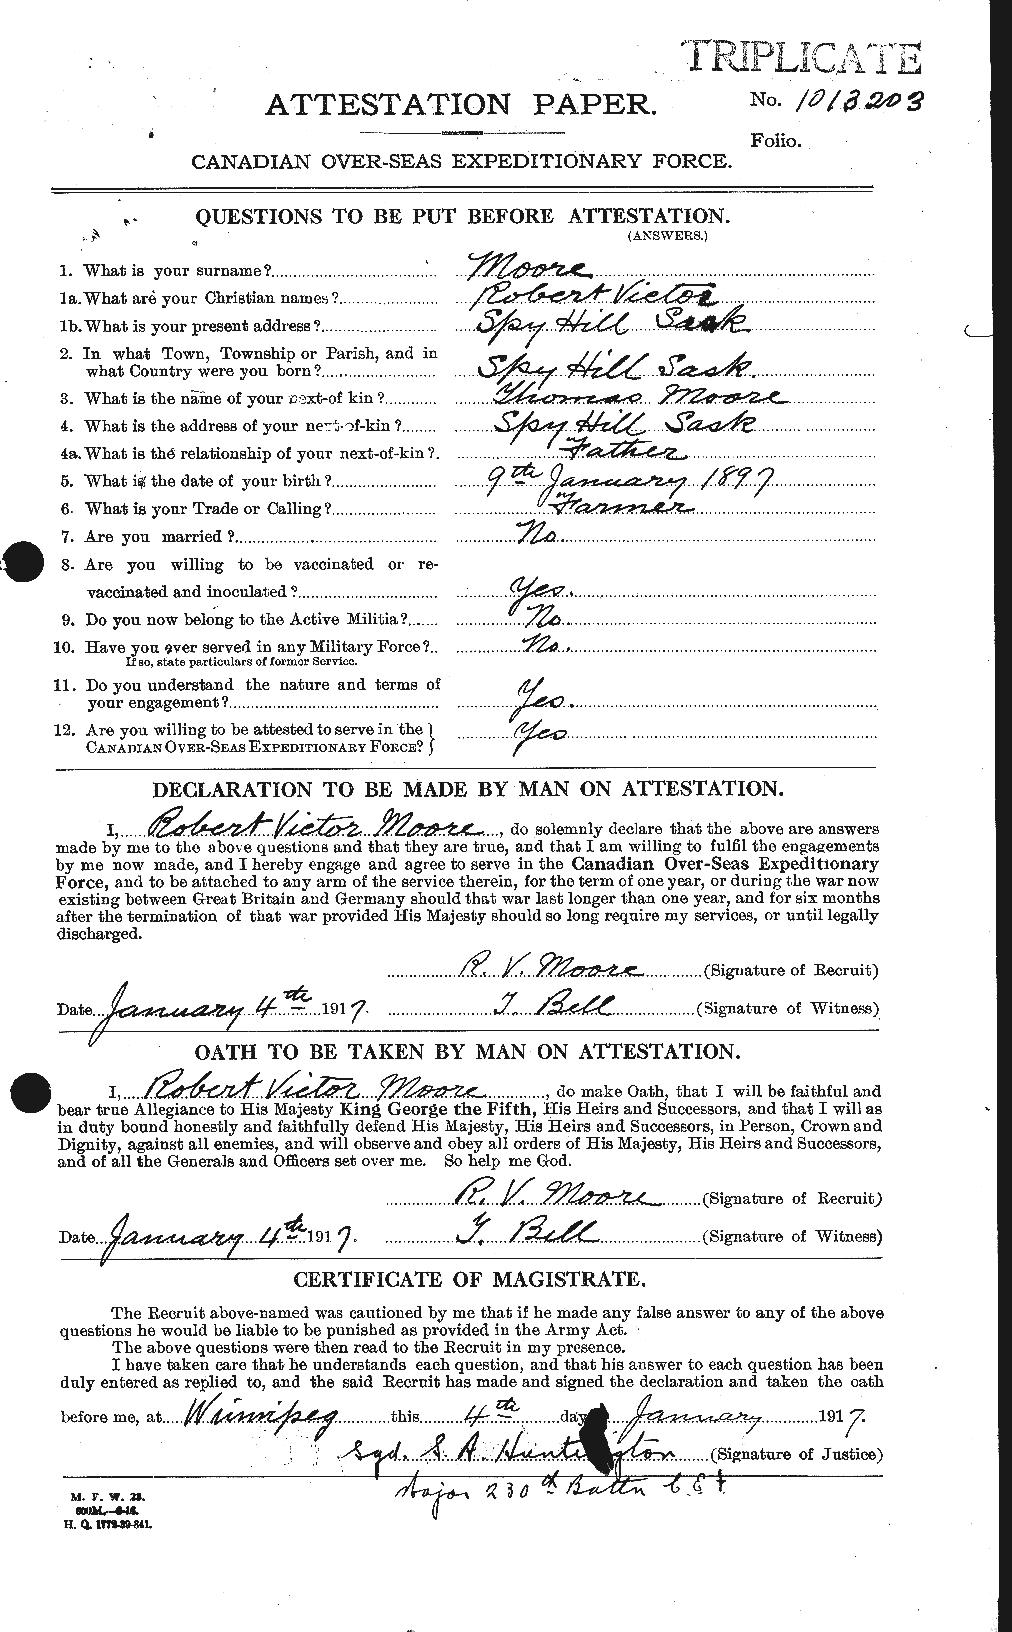 Personnel Records of the First World War - CEF 503584a